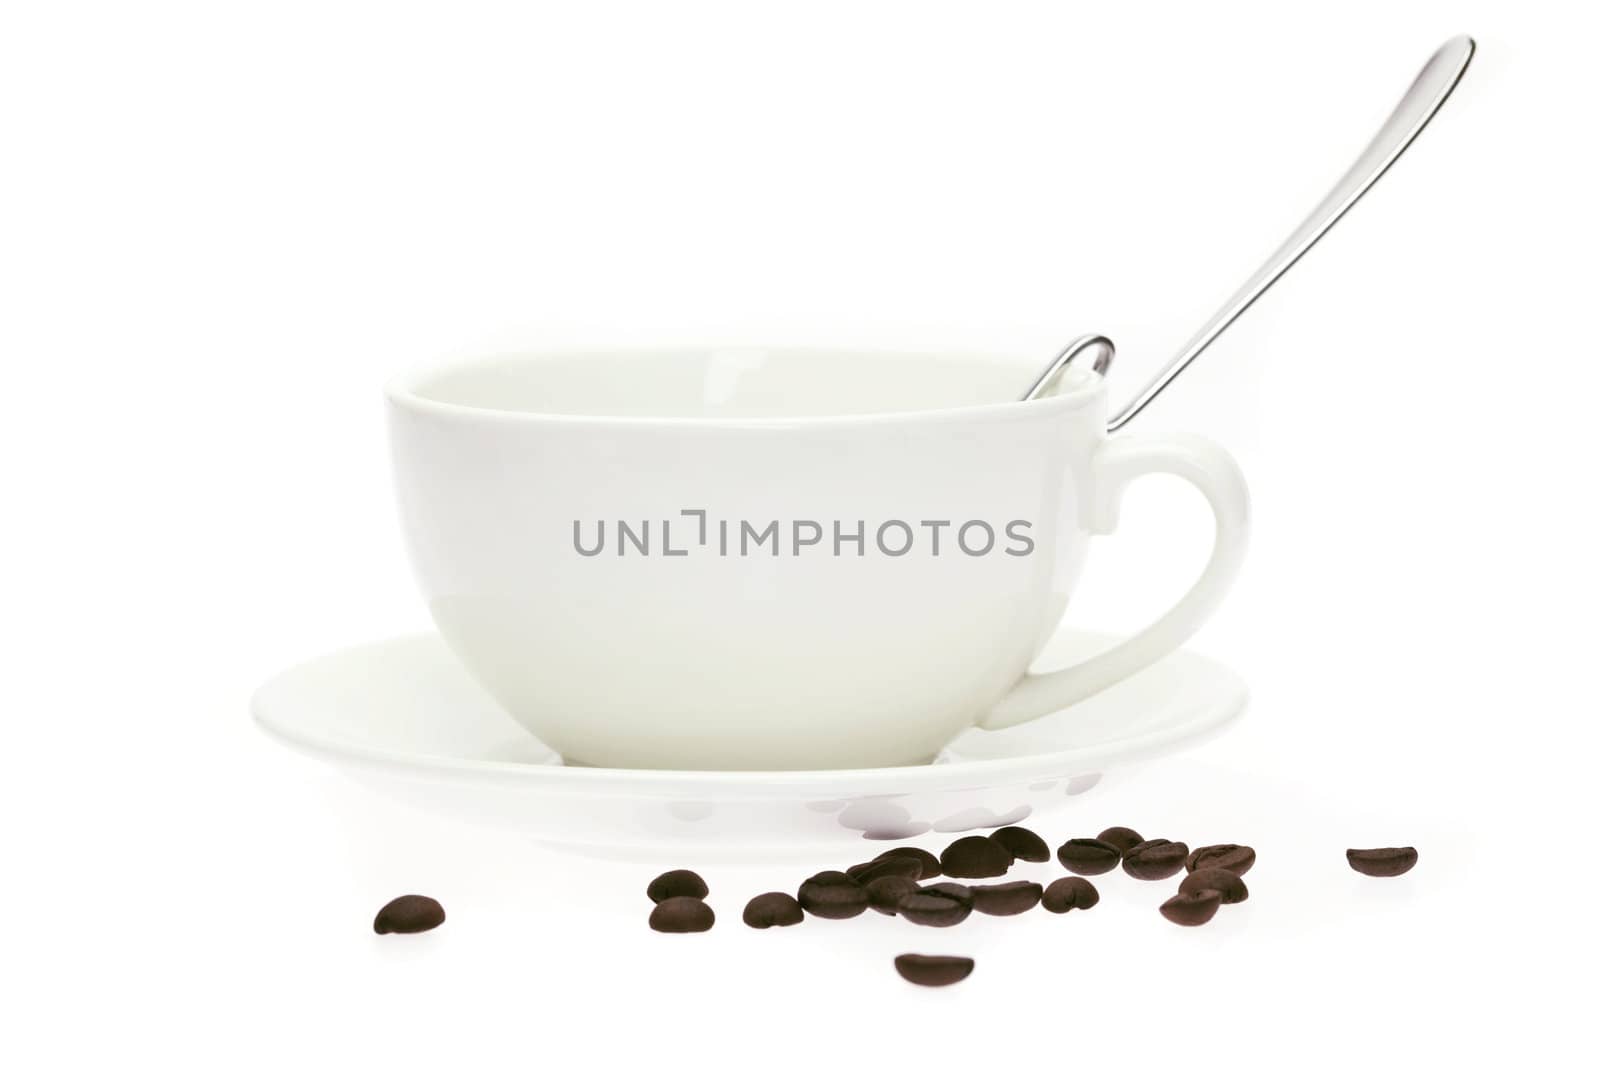 cup and saucer and coffee beans isolated on white